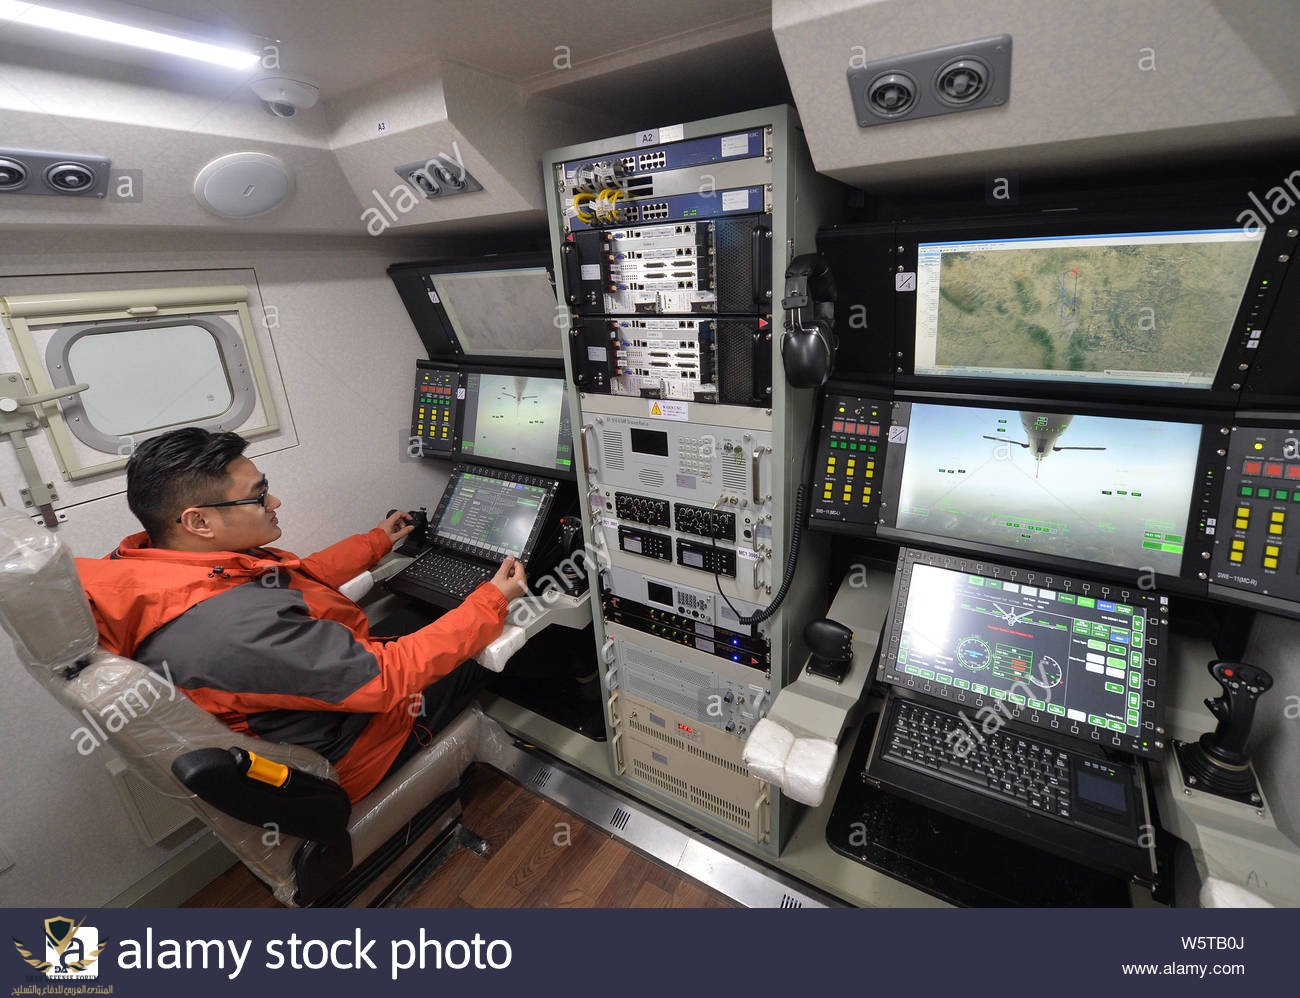 file-a-chinese-worker-tests-the-operation-and-control-system-for-the-wing-loong-unmanned-aeria...jpg